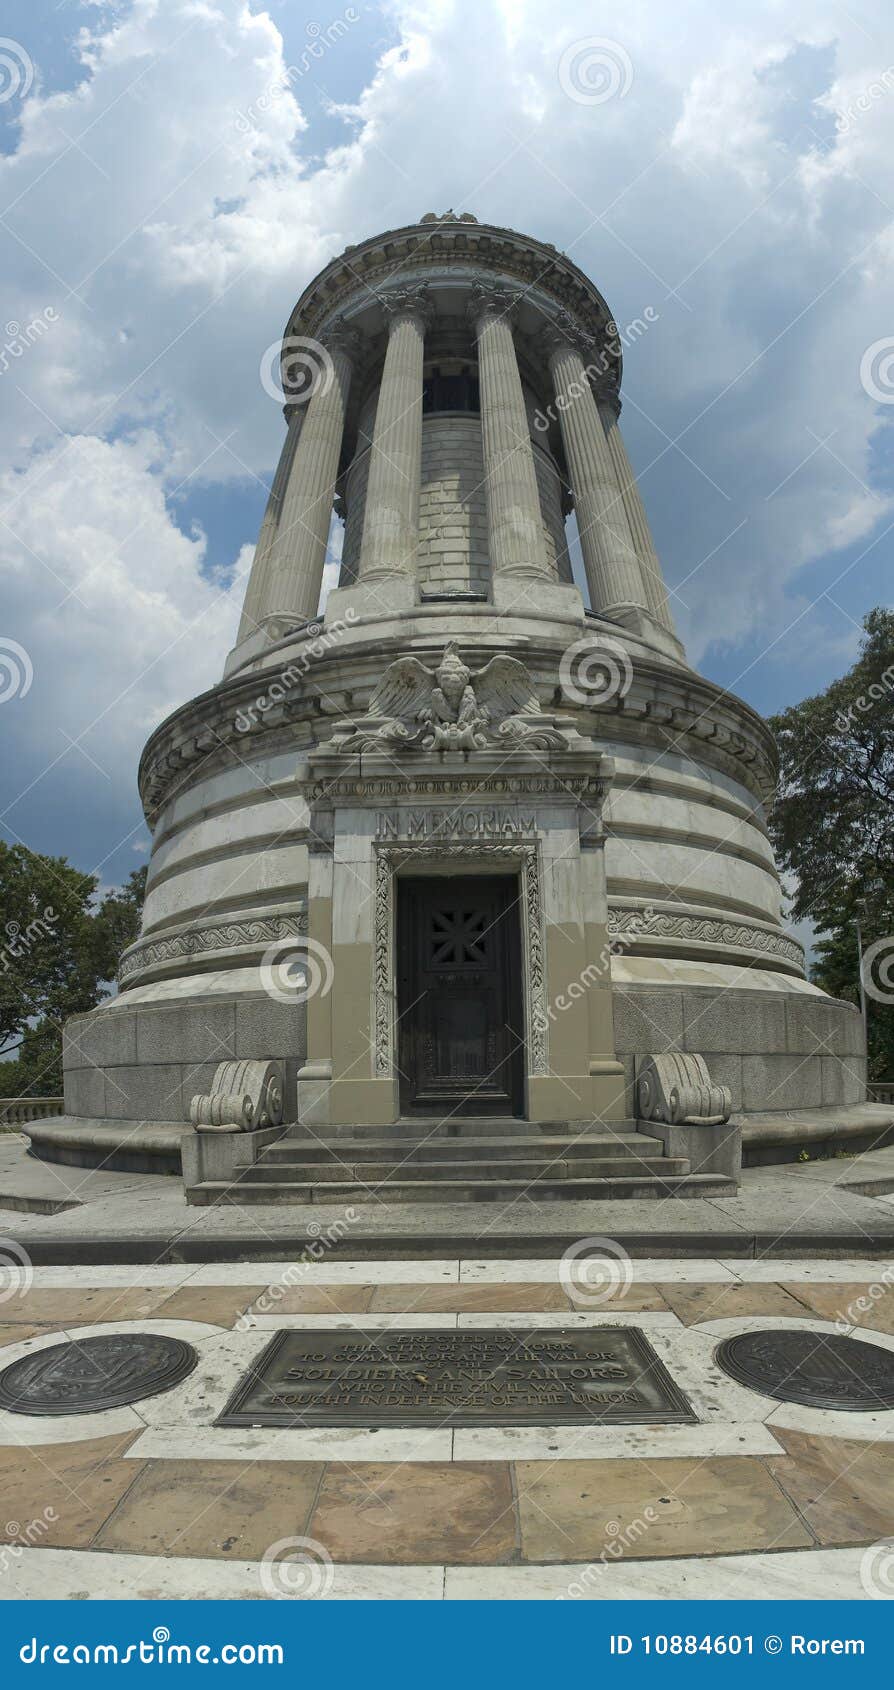 soldiers' and sailors' monument